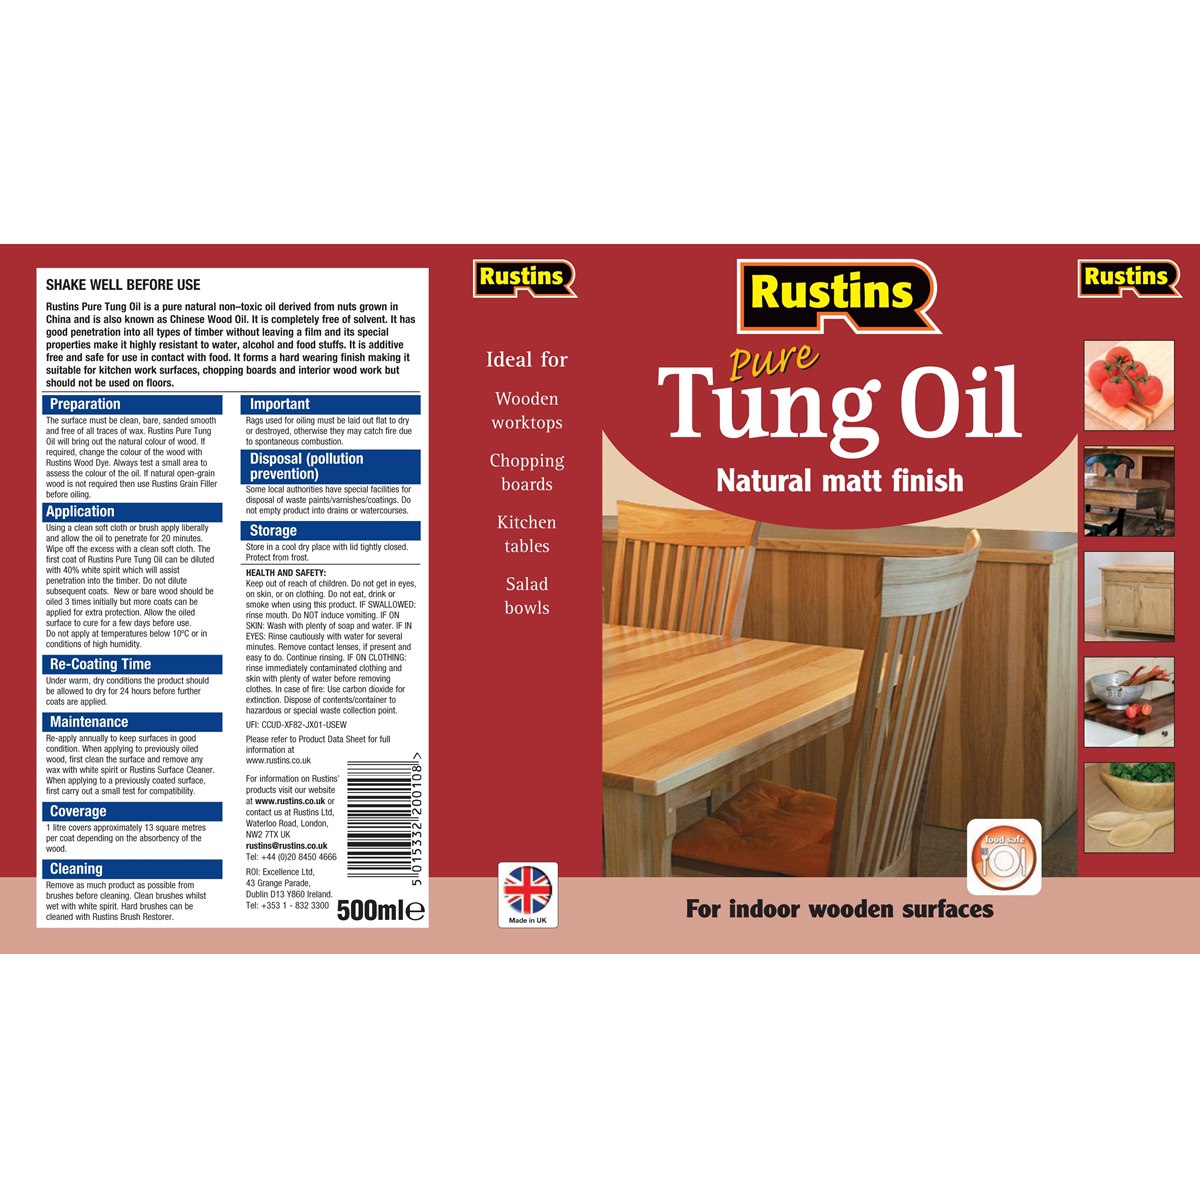 Rustins Pure Tung Oil Usage Instructions